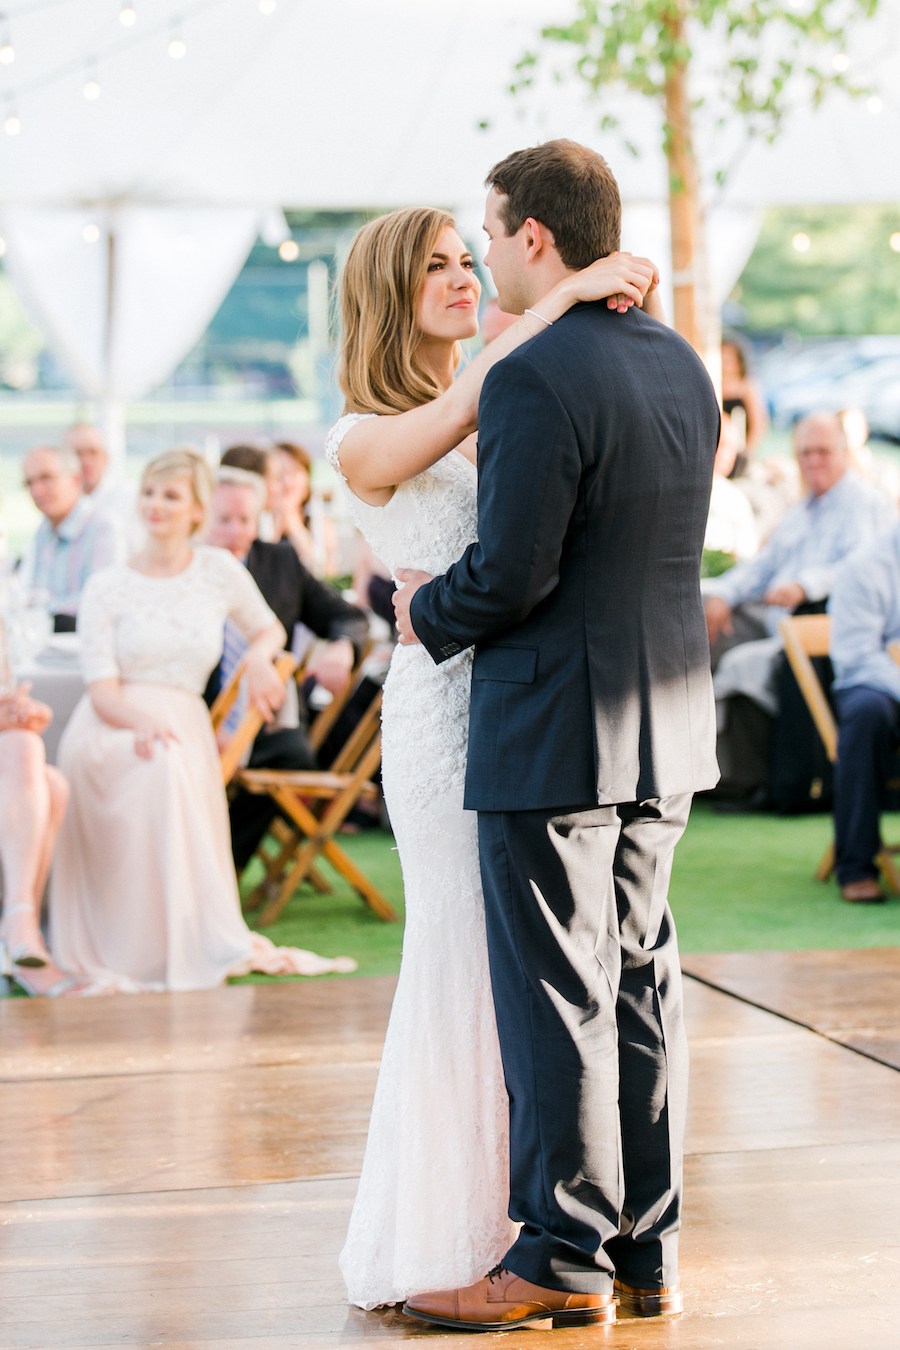 A couple sharing their first dance